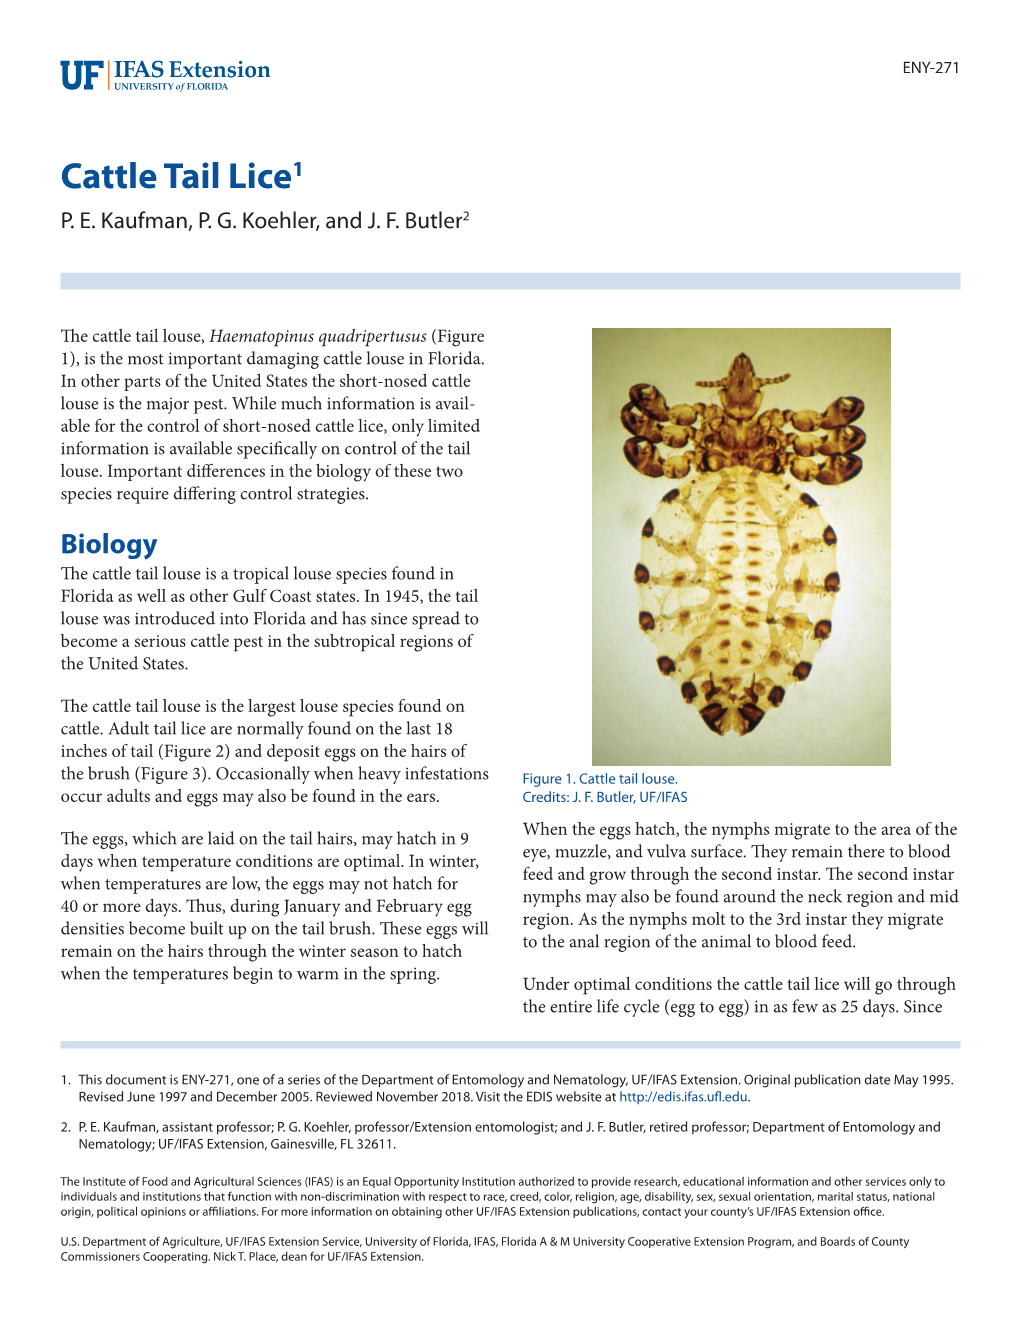 Cattle Tail Lice1 P